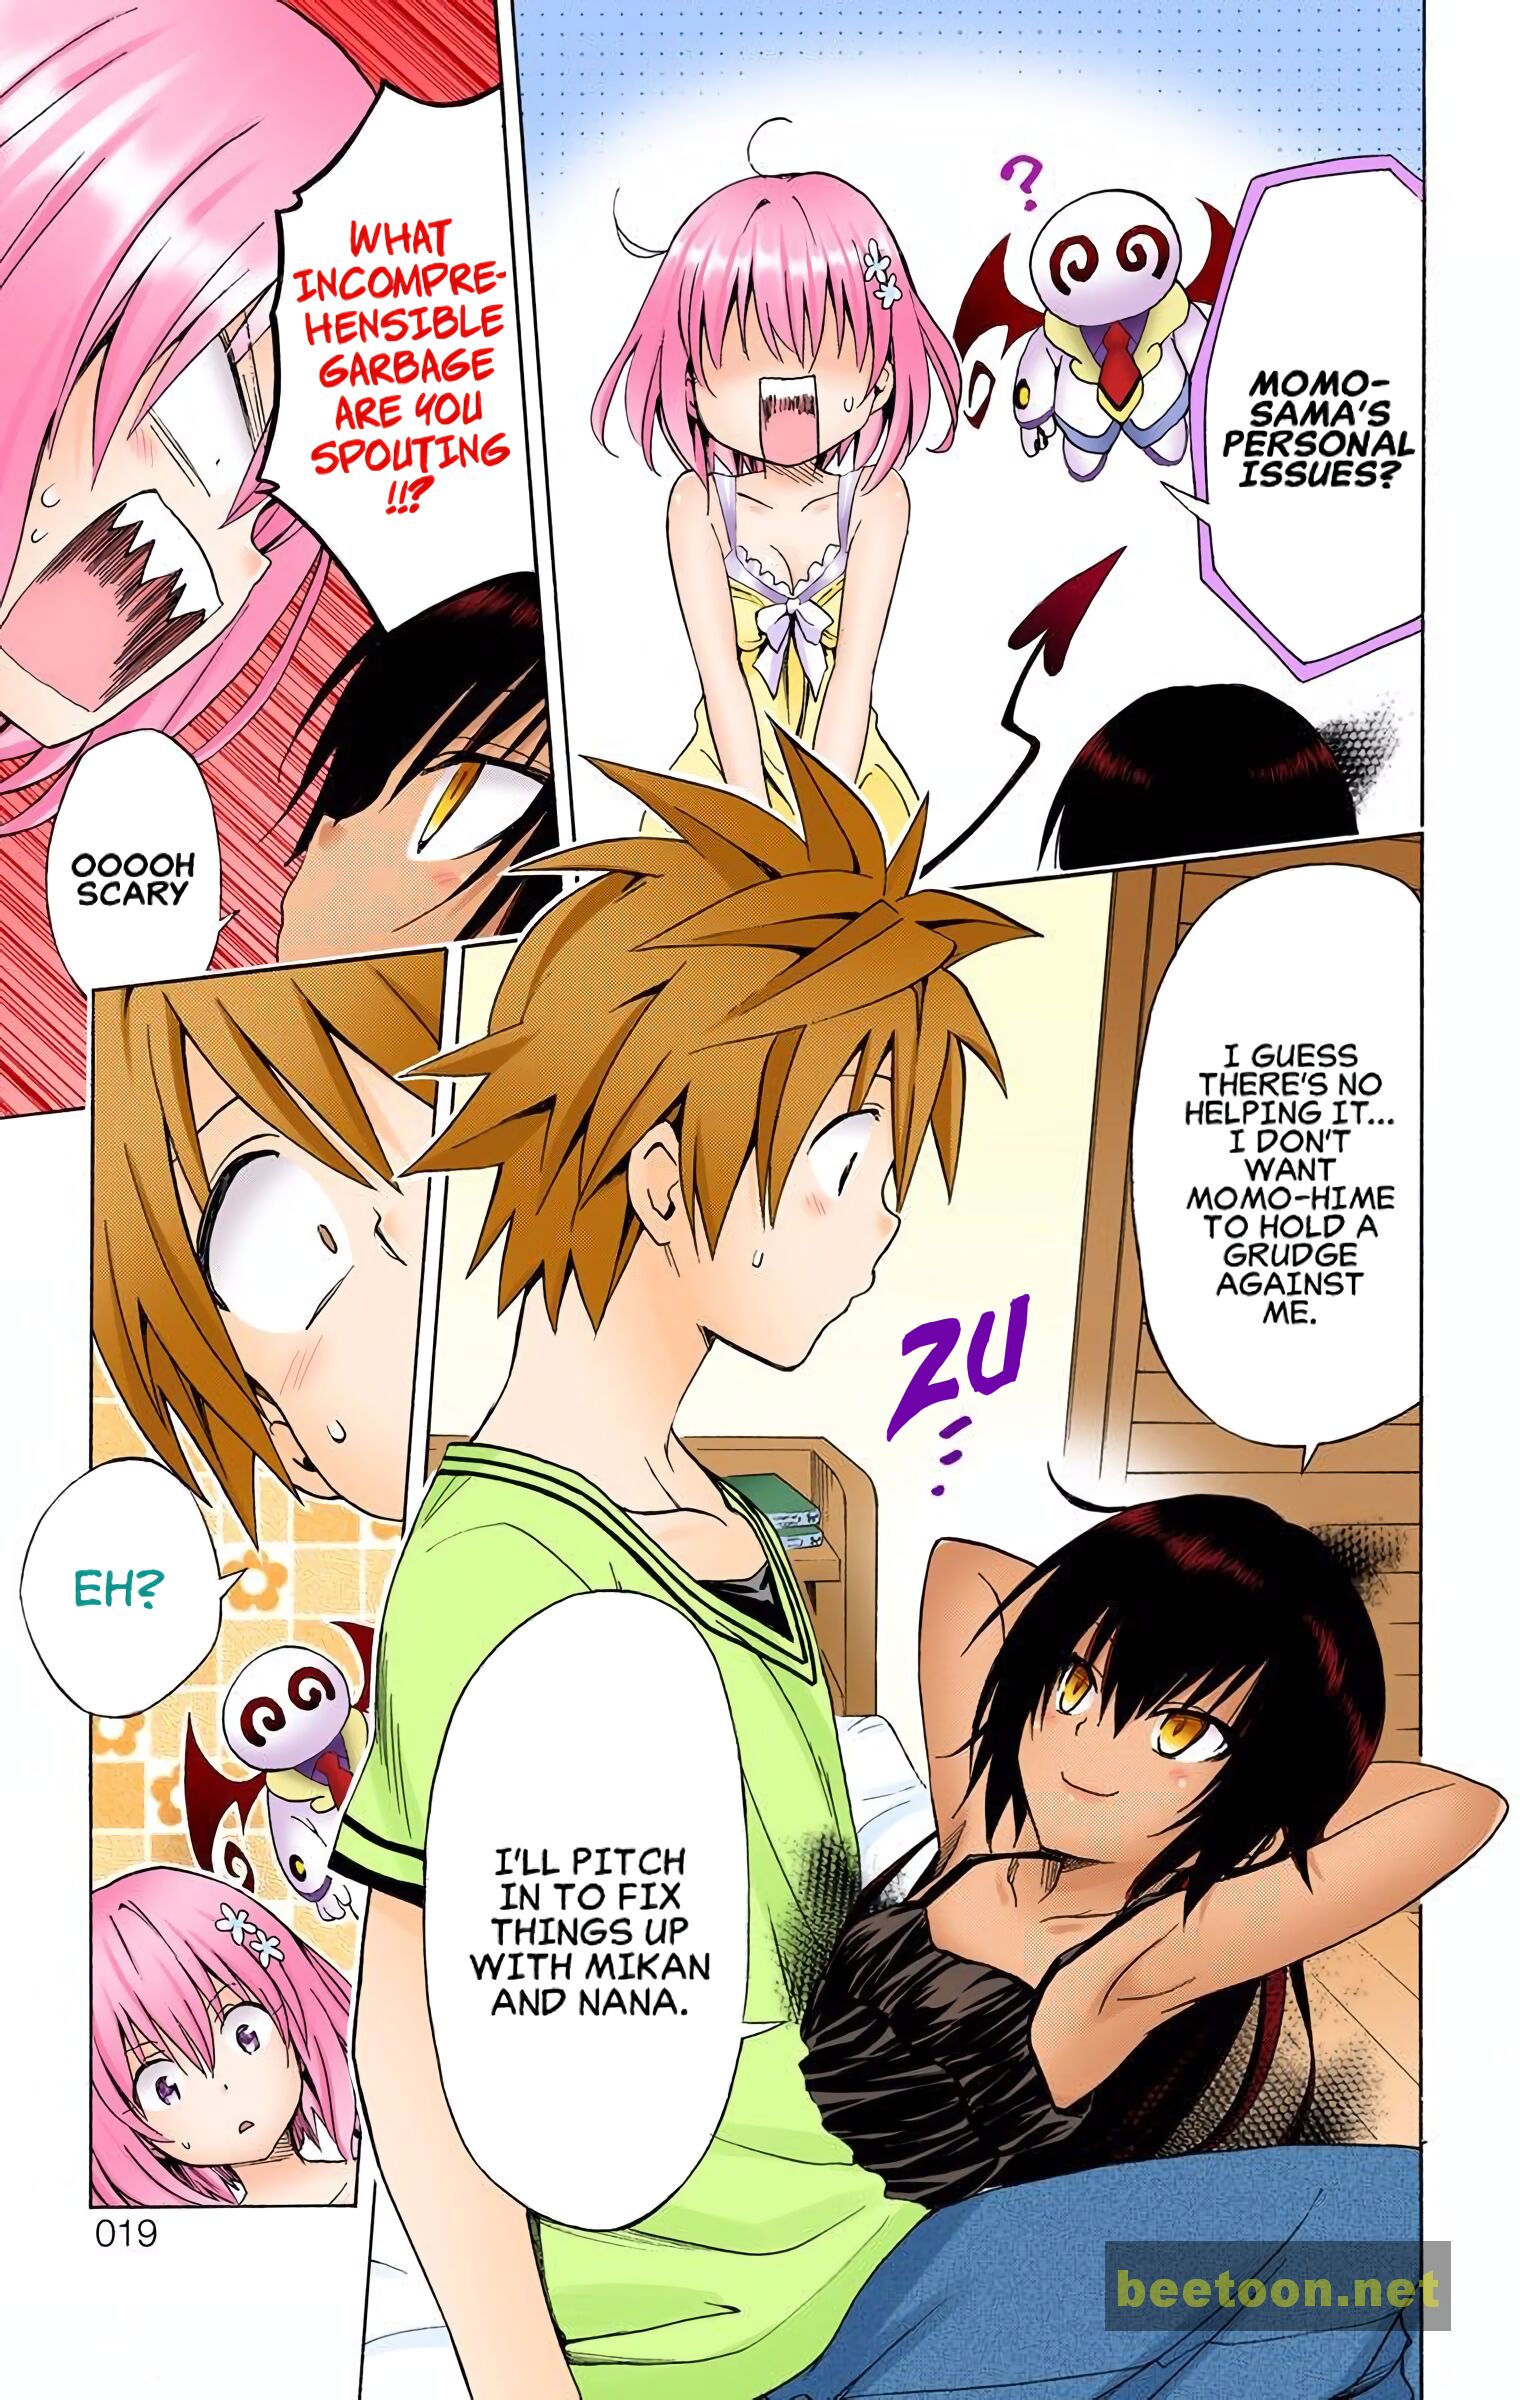 To LOVE-Ru Darkness - Full color Chapter 63 - MyToon.net